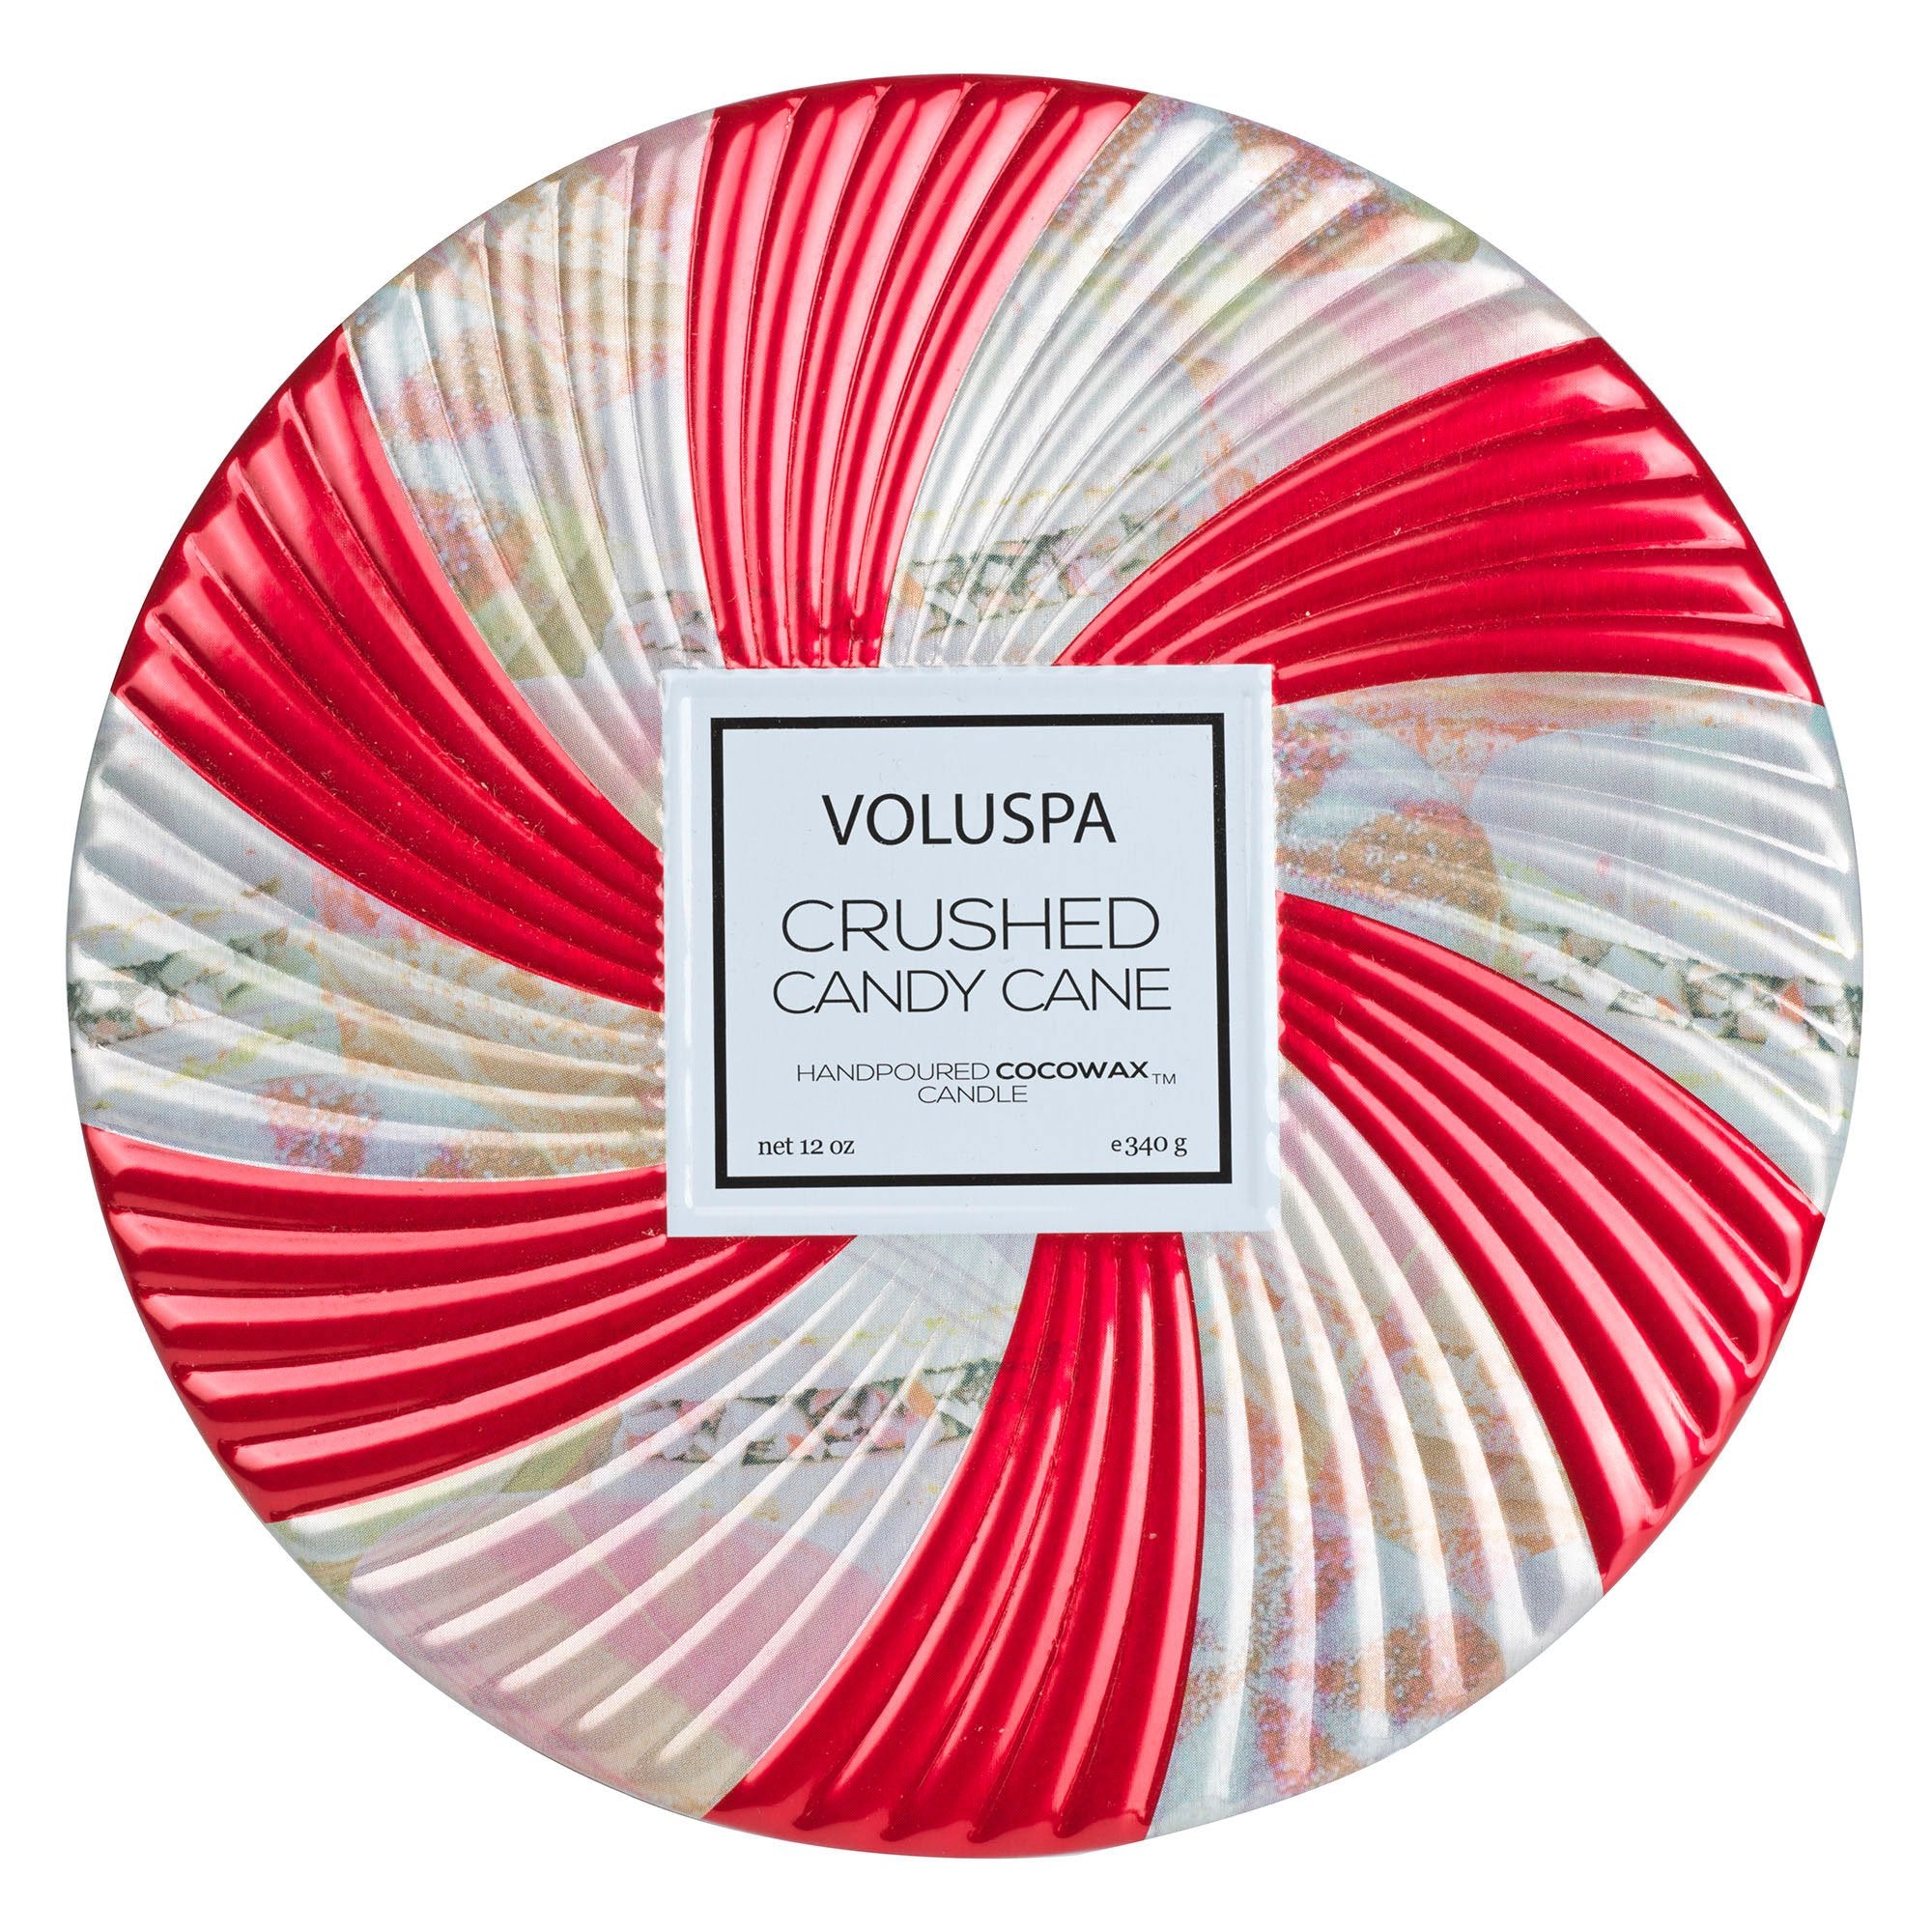 Crushed Candy Cane - 3 Wick Tin Candle